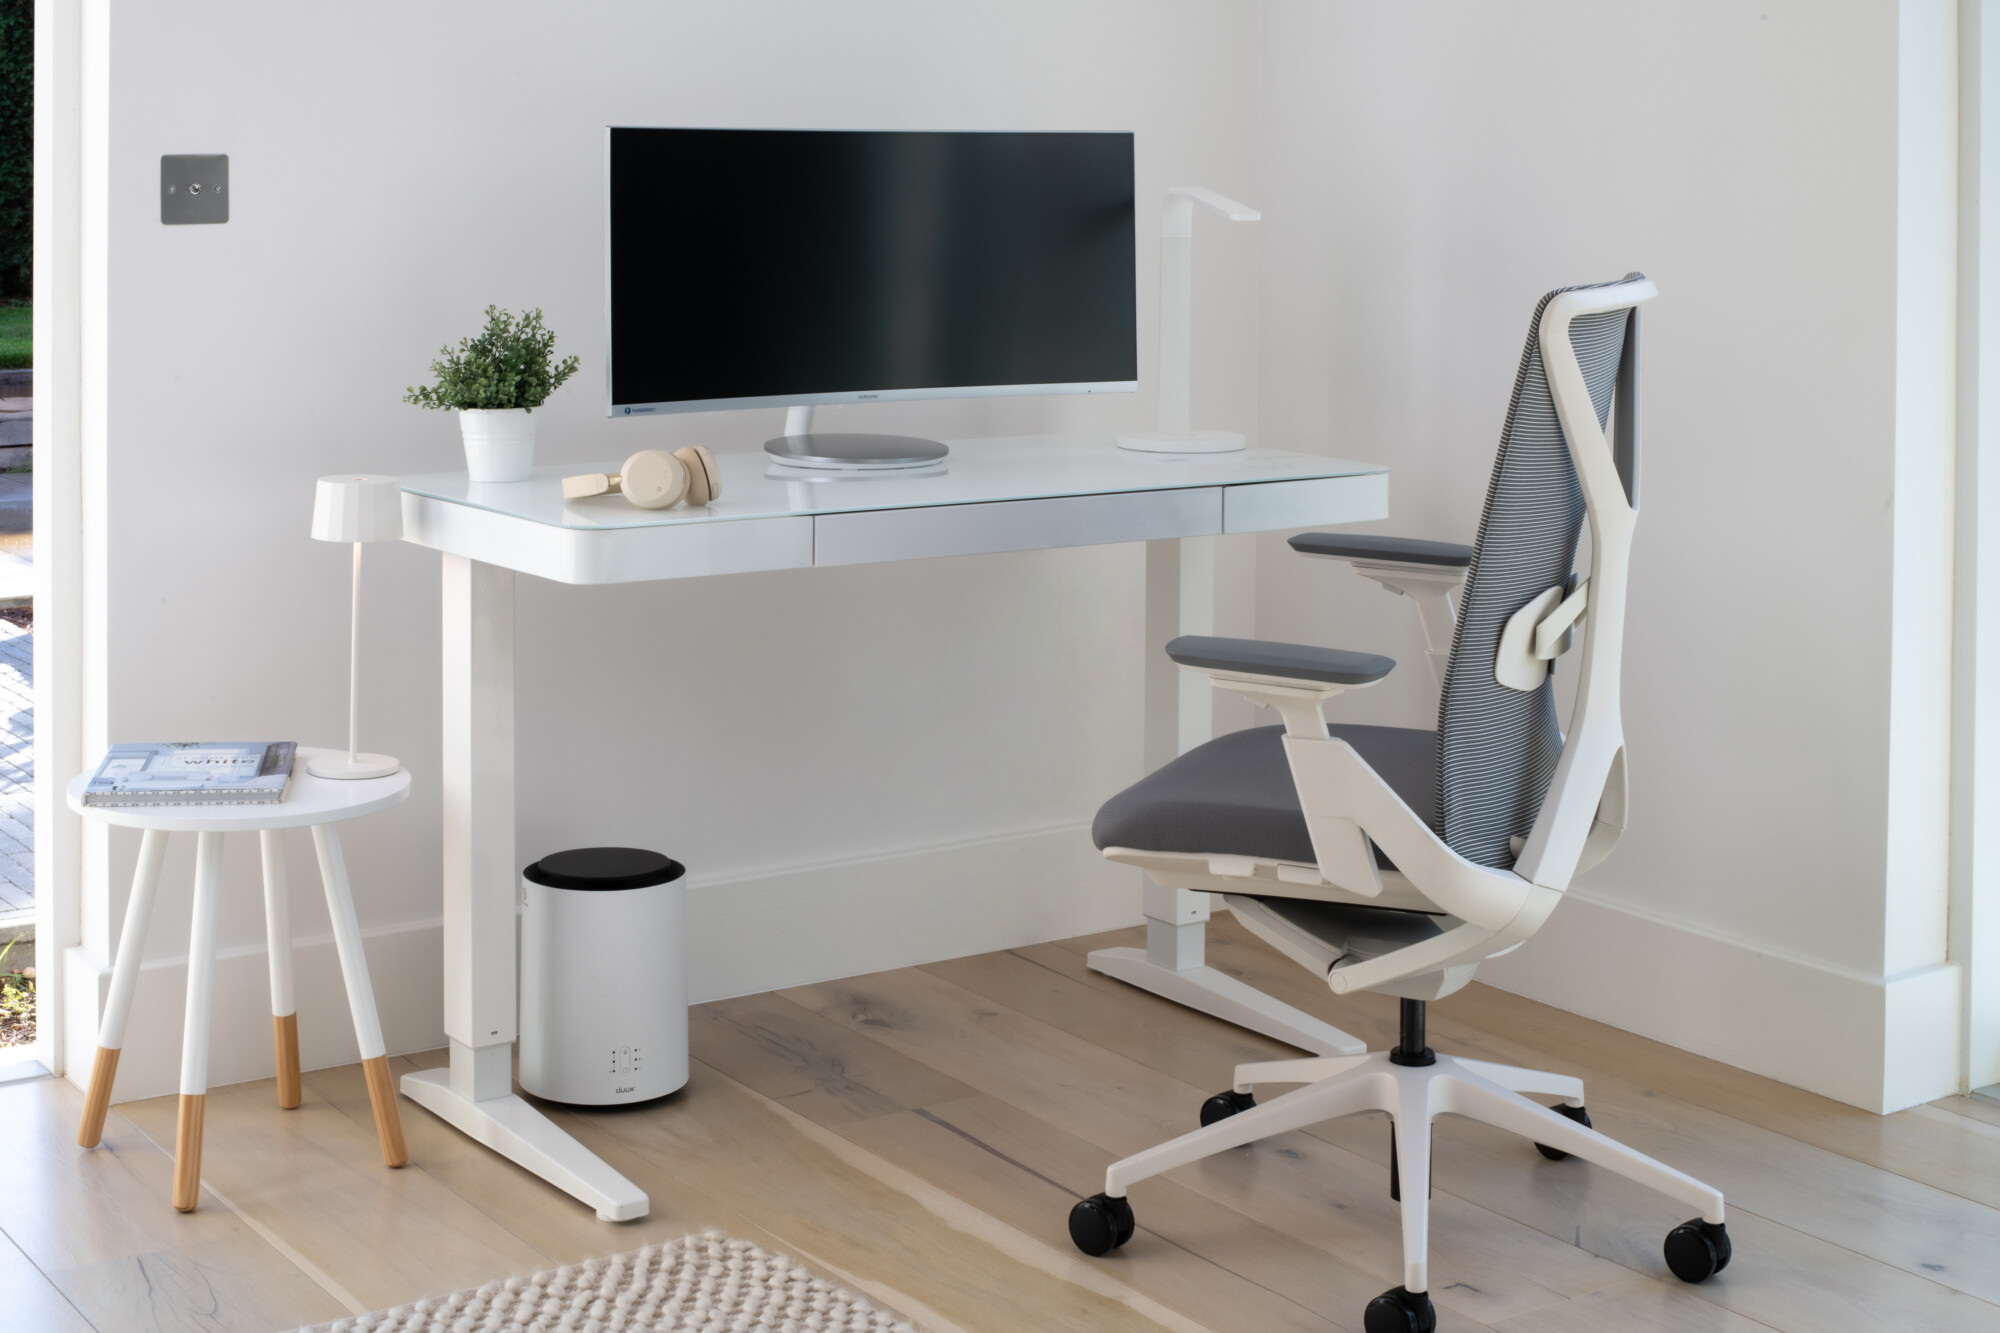 smart home office setup featuring an electric height adjustable smart desk with a whiteboard friendly glass top paired with an ergonomic home office chair.